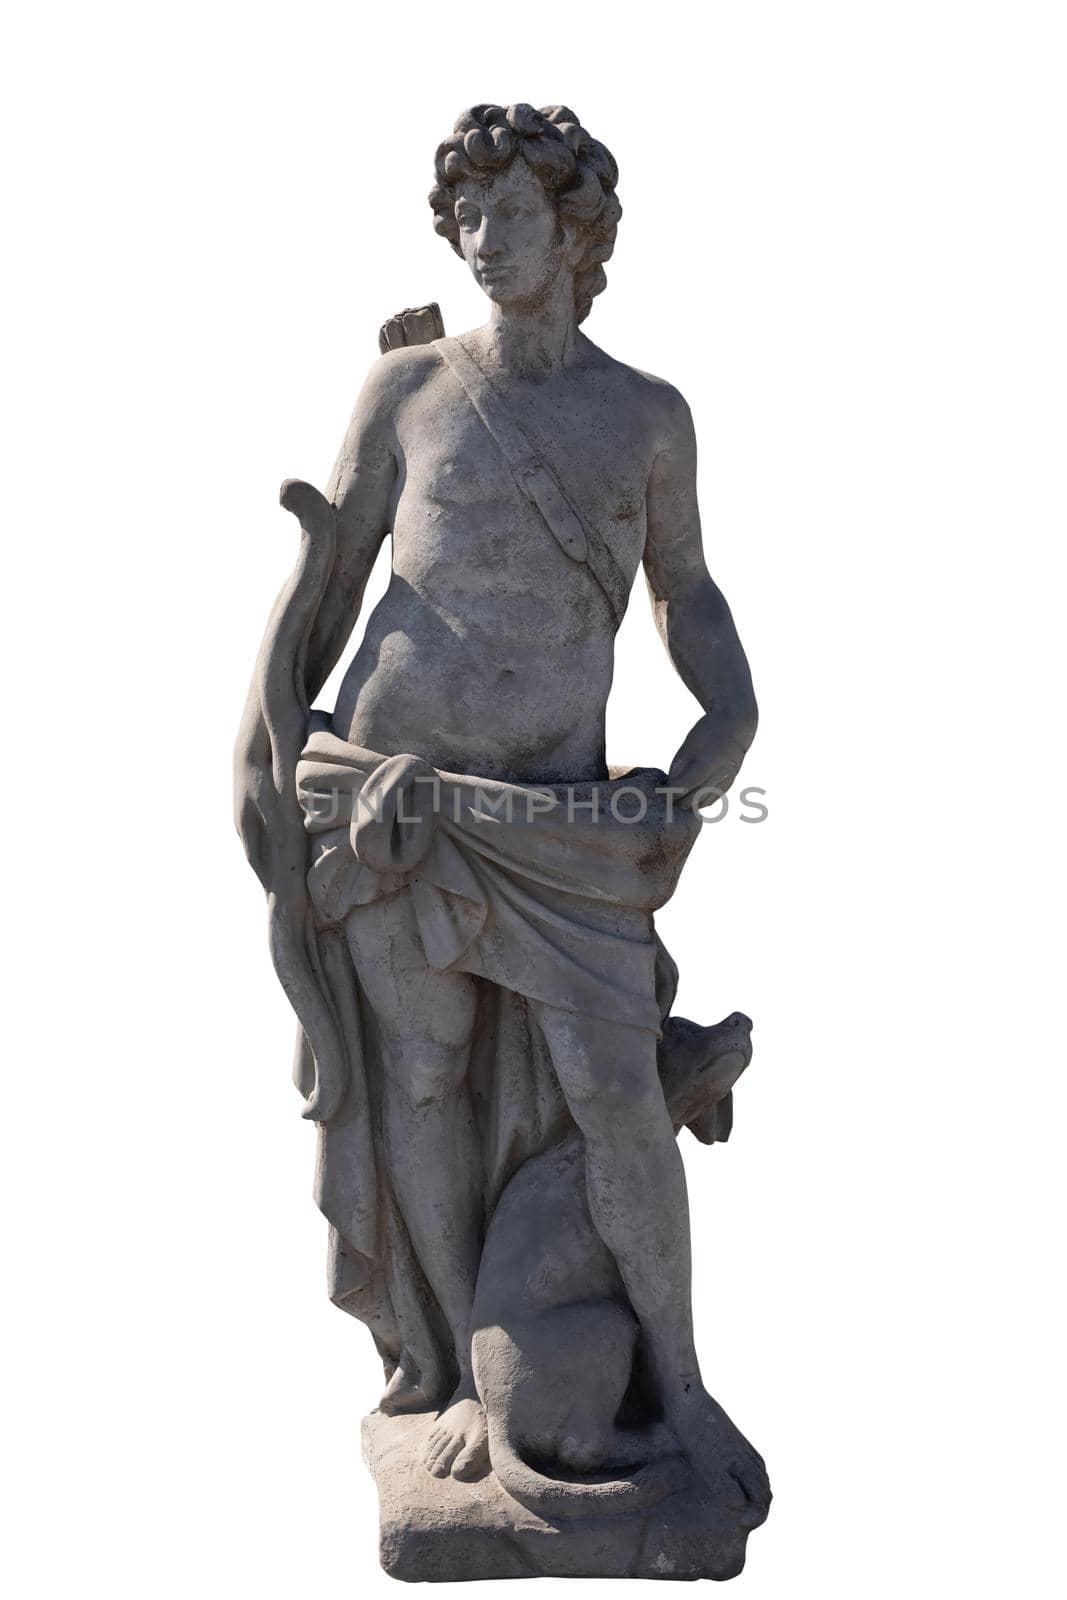 Stone sculpture of male hunter with dog on white background. art and classical style romantic figurative stone sculpture.